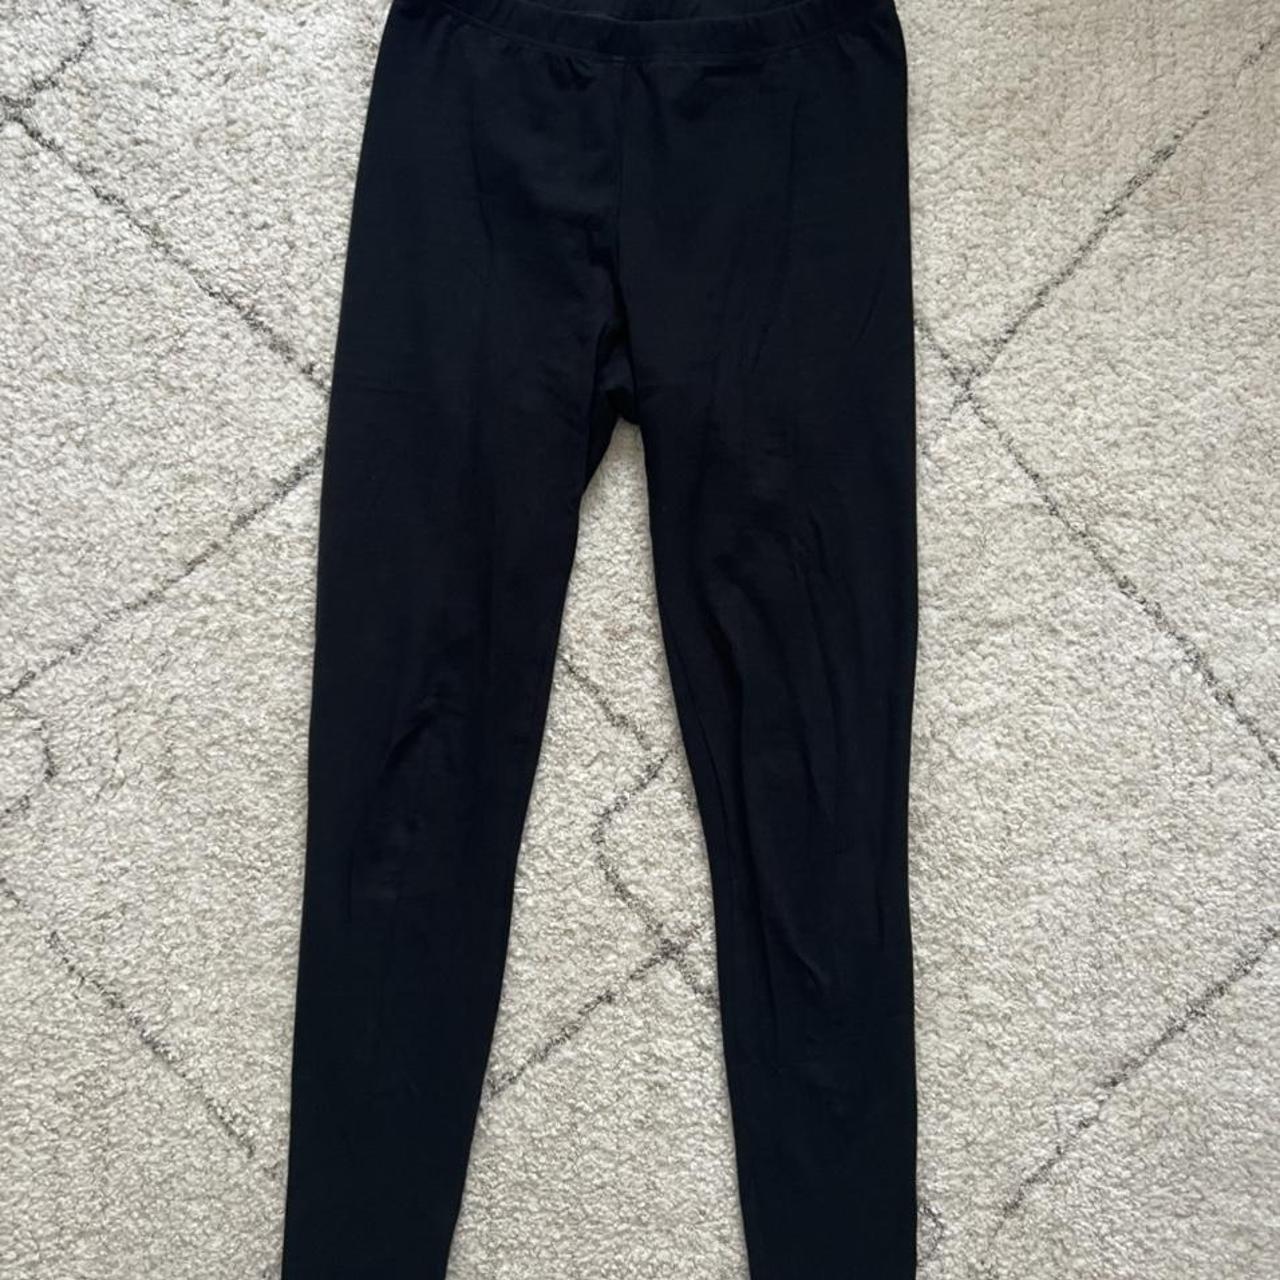 Product Image 2 - Causal black leggings
For Workout or